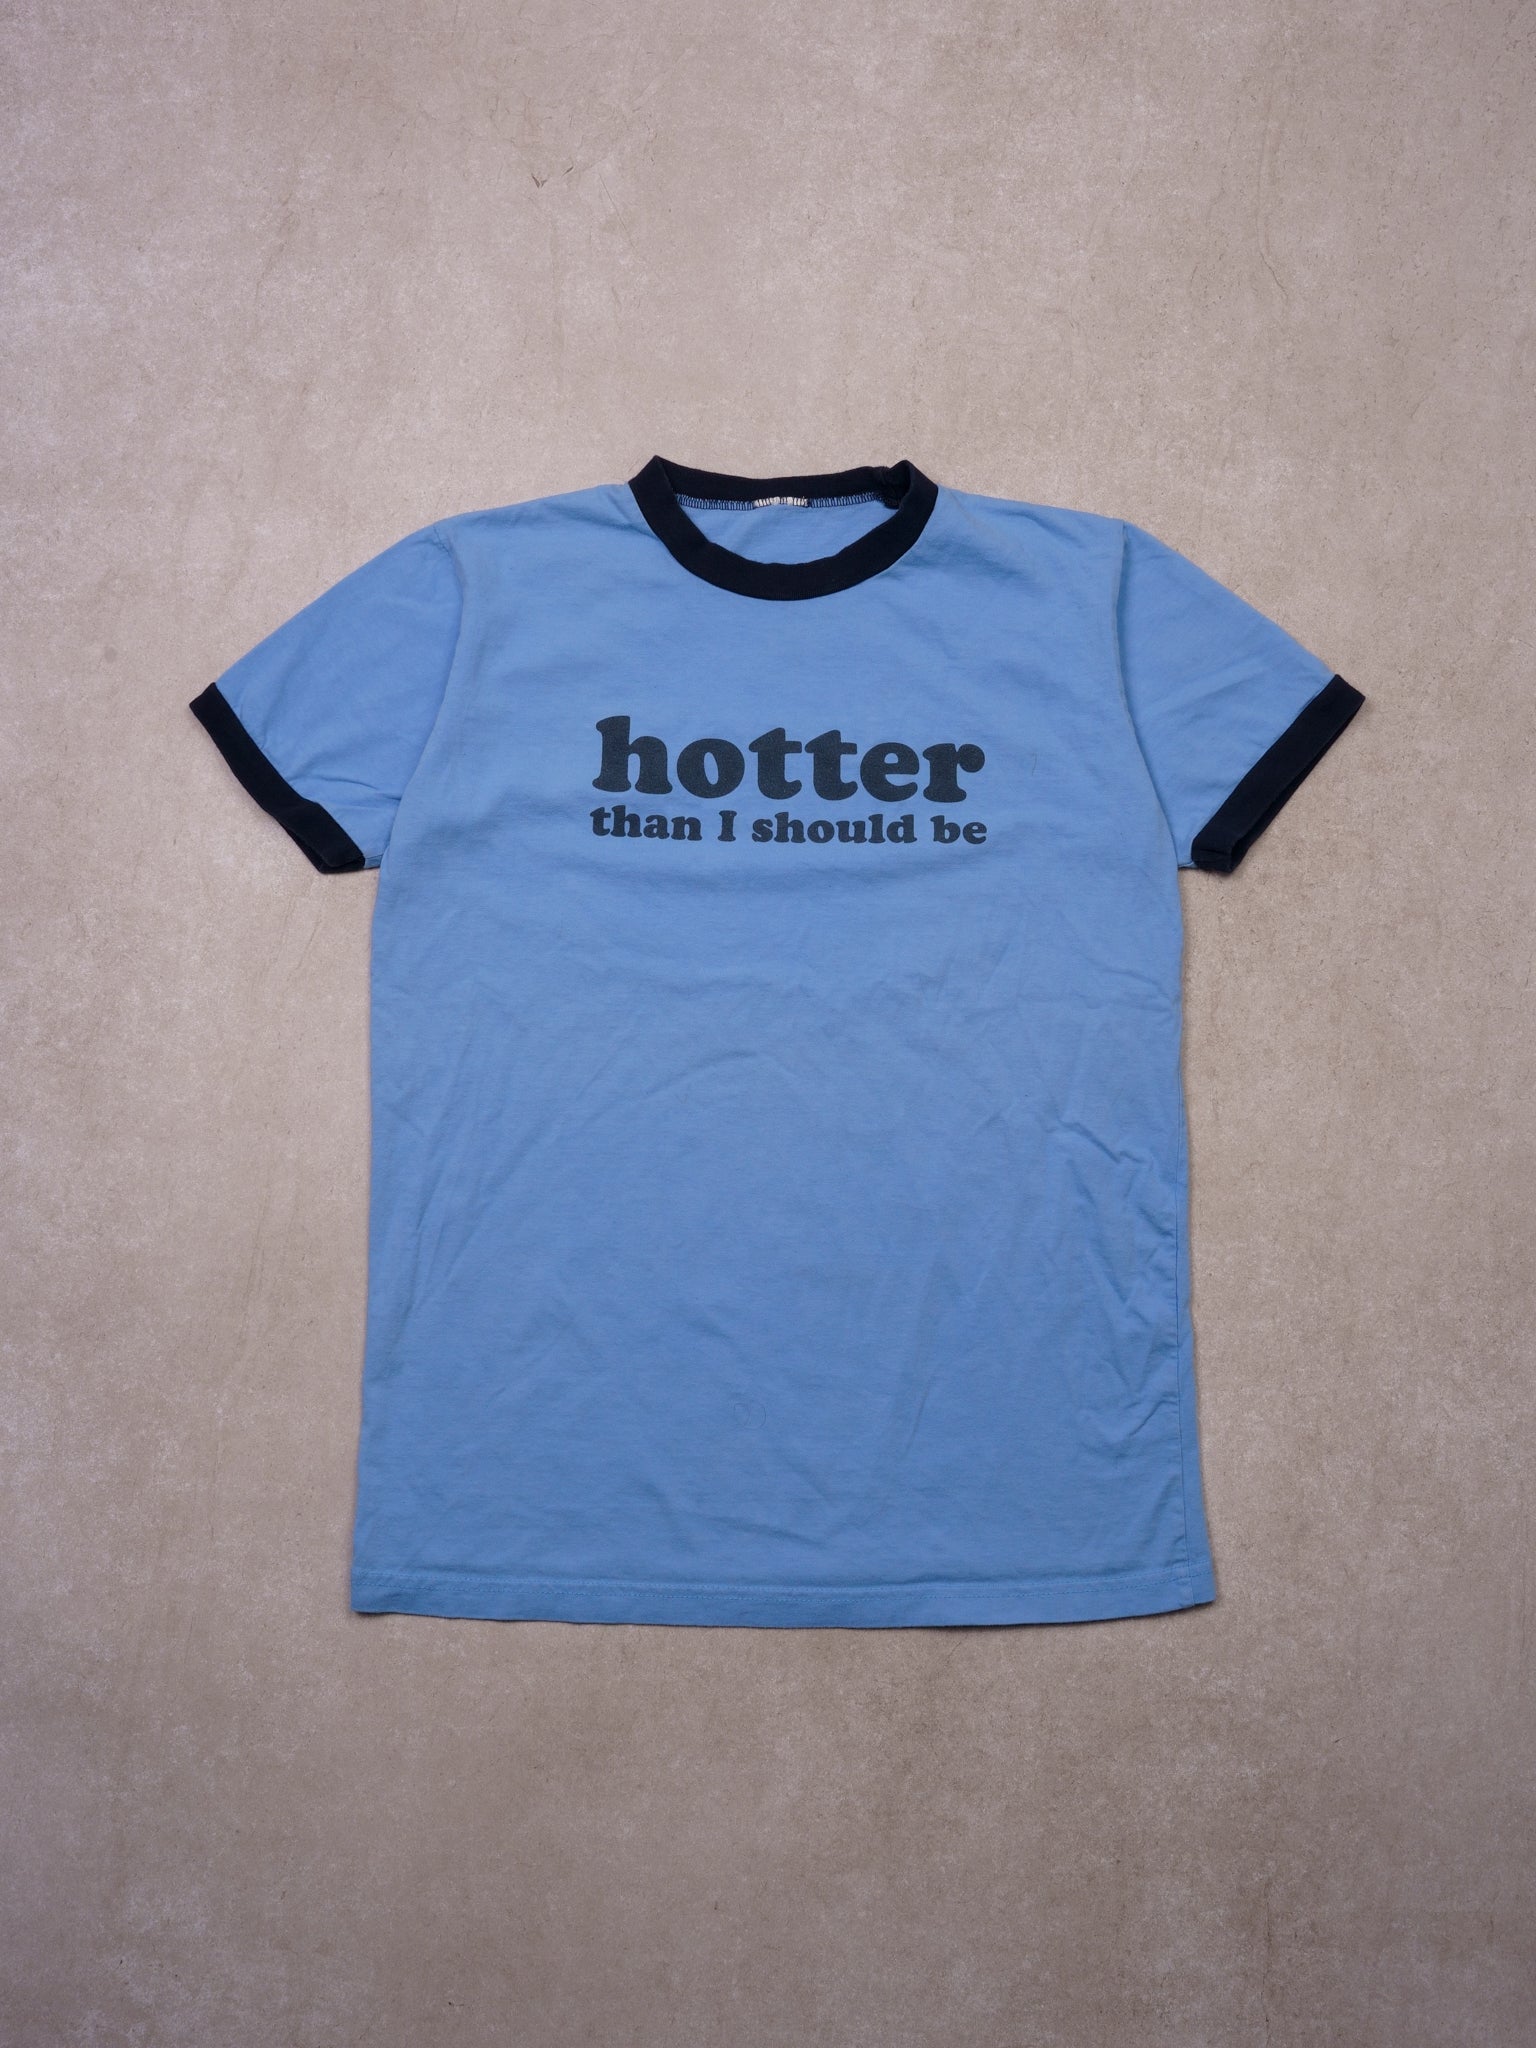 Vintage 90s Baby Blue "Hotter than I should be" Tee (M)